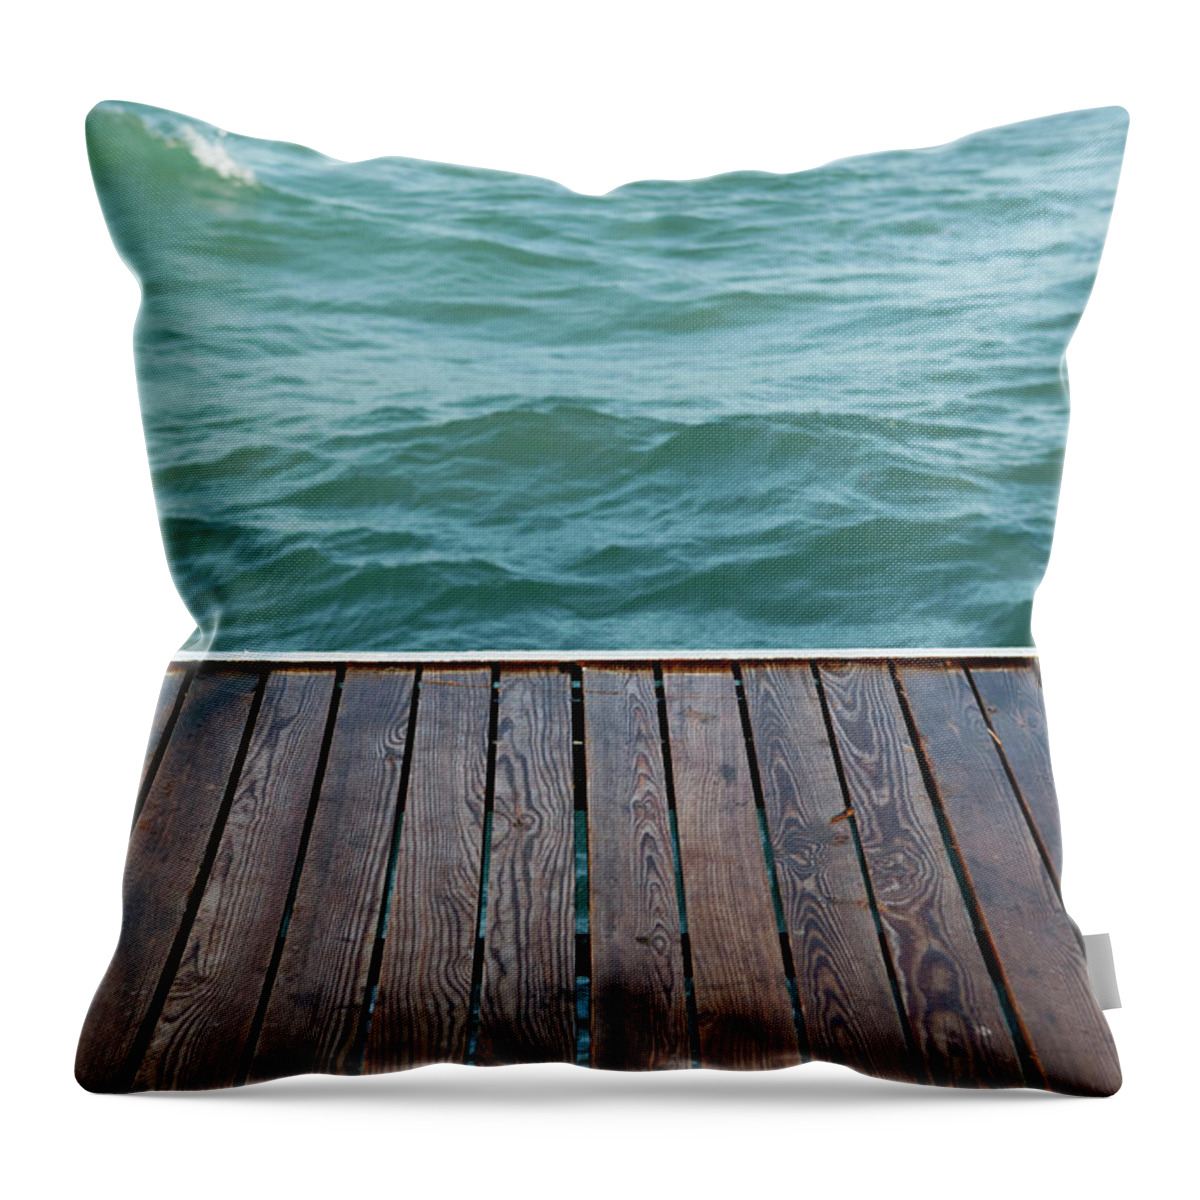 Water's Edge Throw Pillow featuring the photograph Platform Beside Sea by Mbtphotos